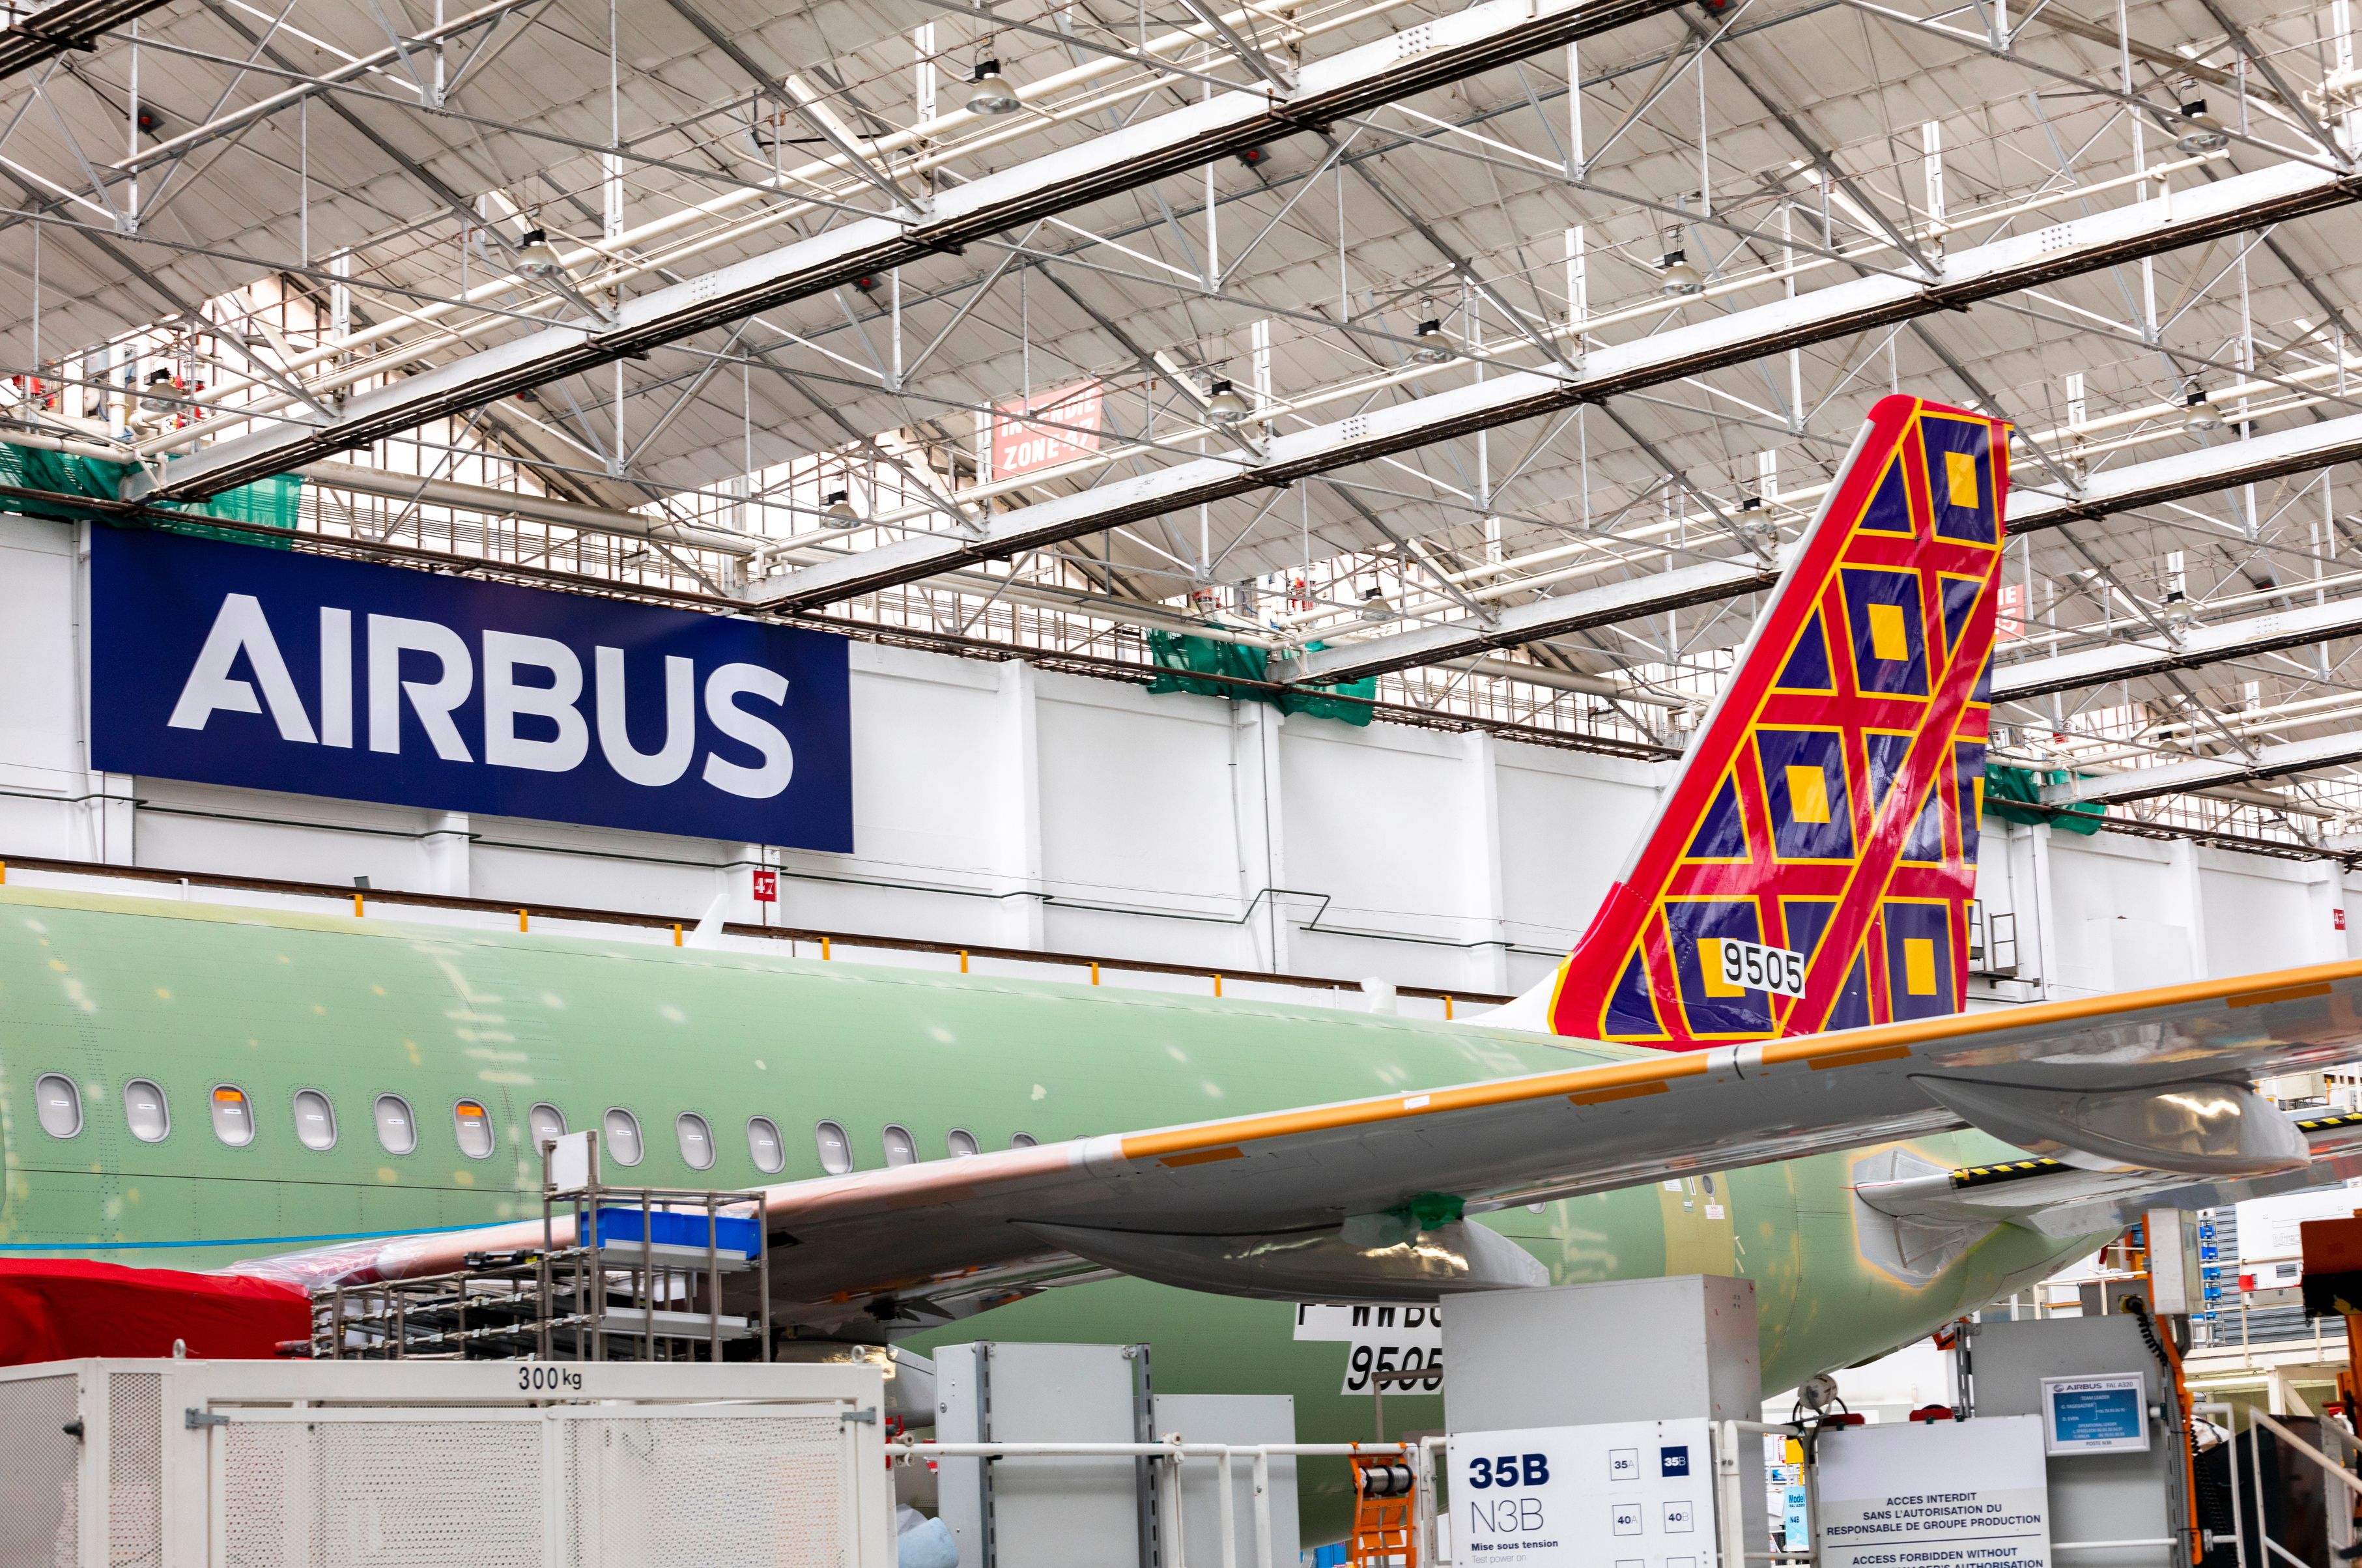 A Batik Air Airbus A320neo in Airbus' assembly line.